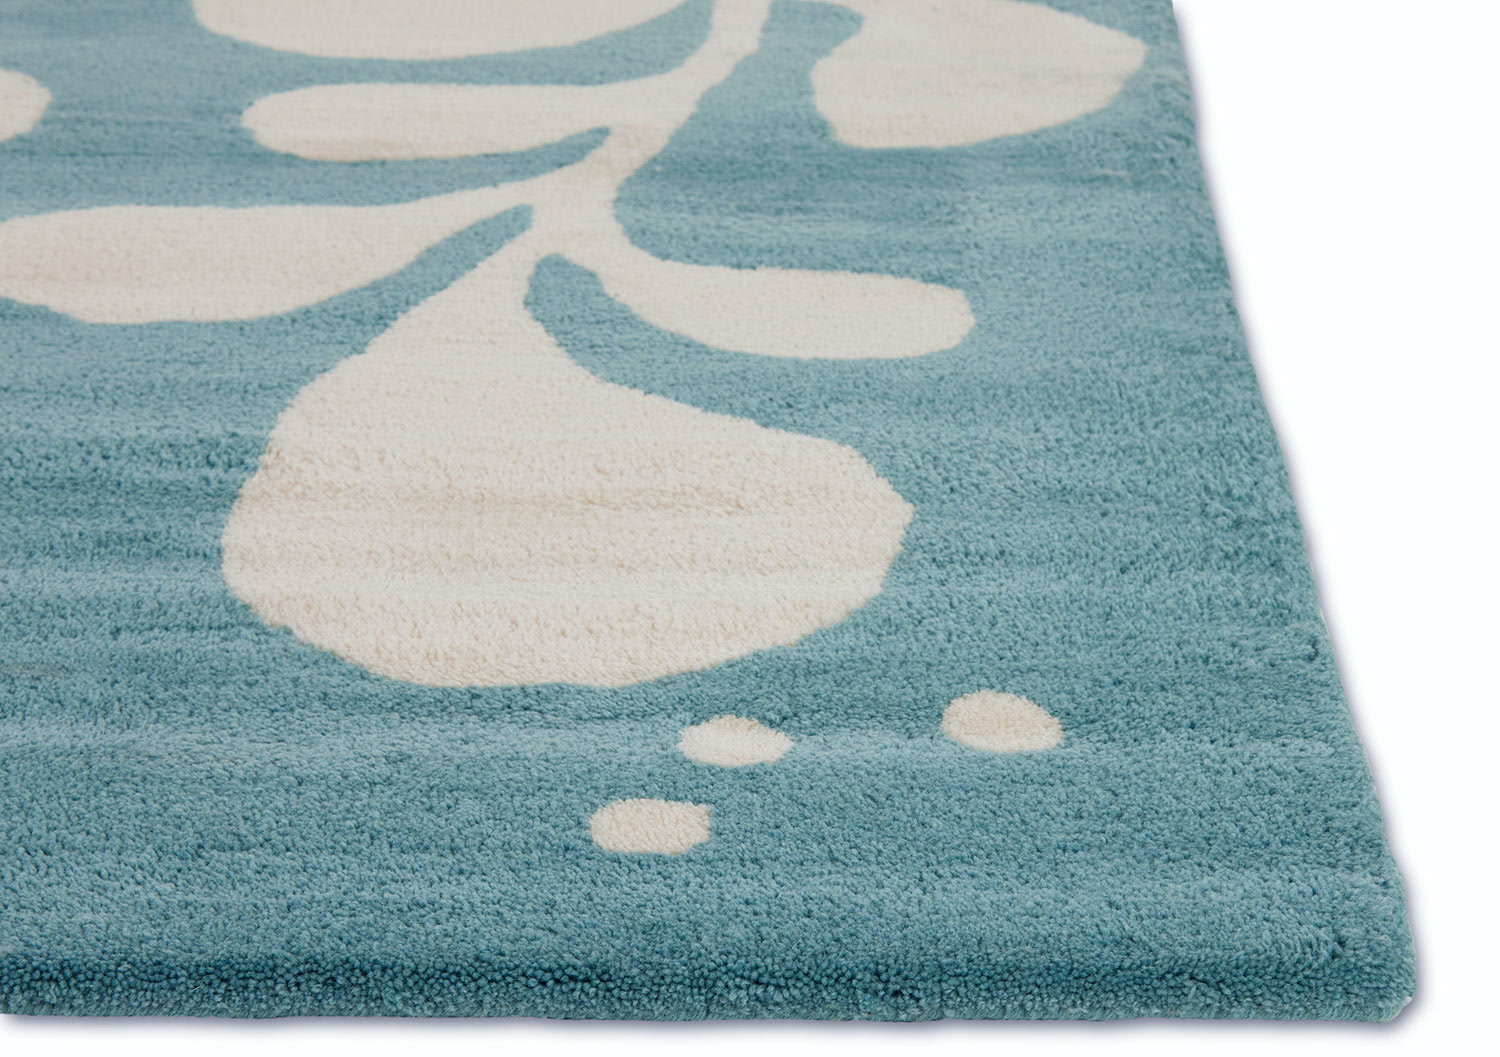 A corner detail of a neutral and blue area rug with abstract designs on it called Vine Hush